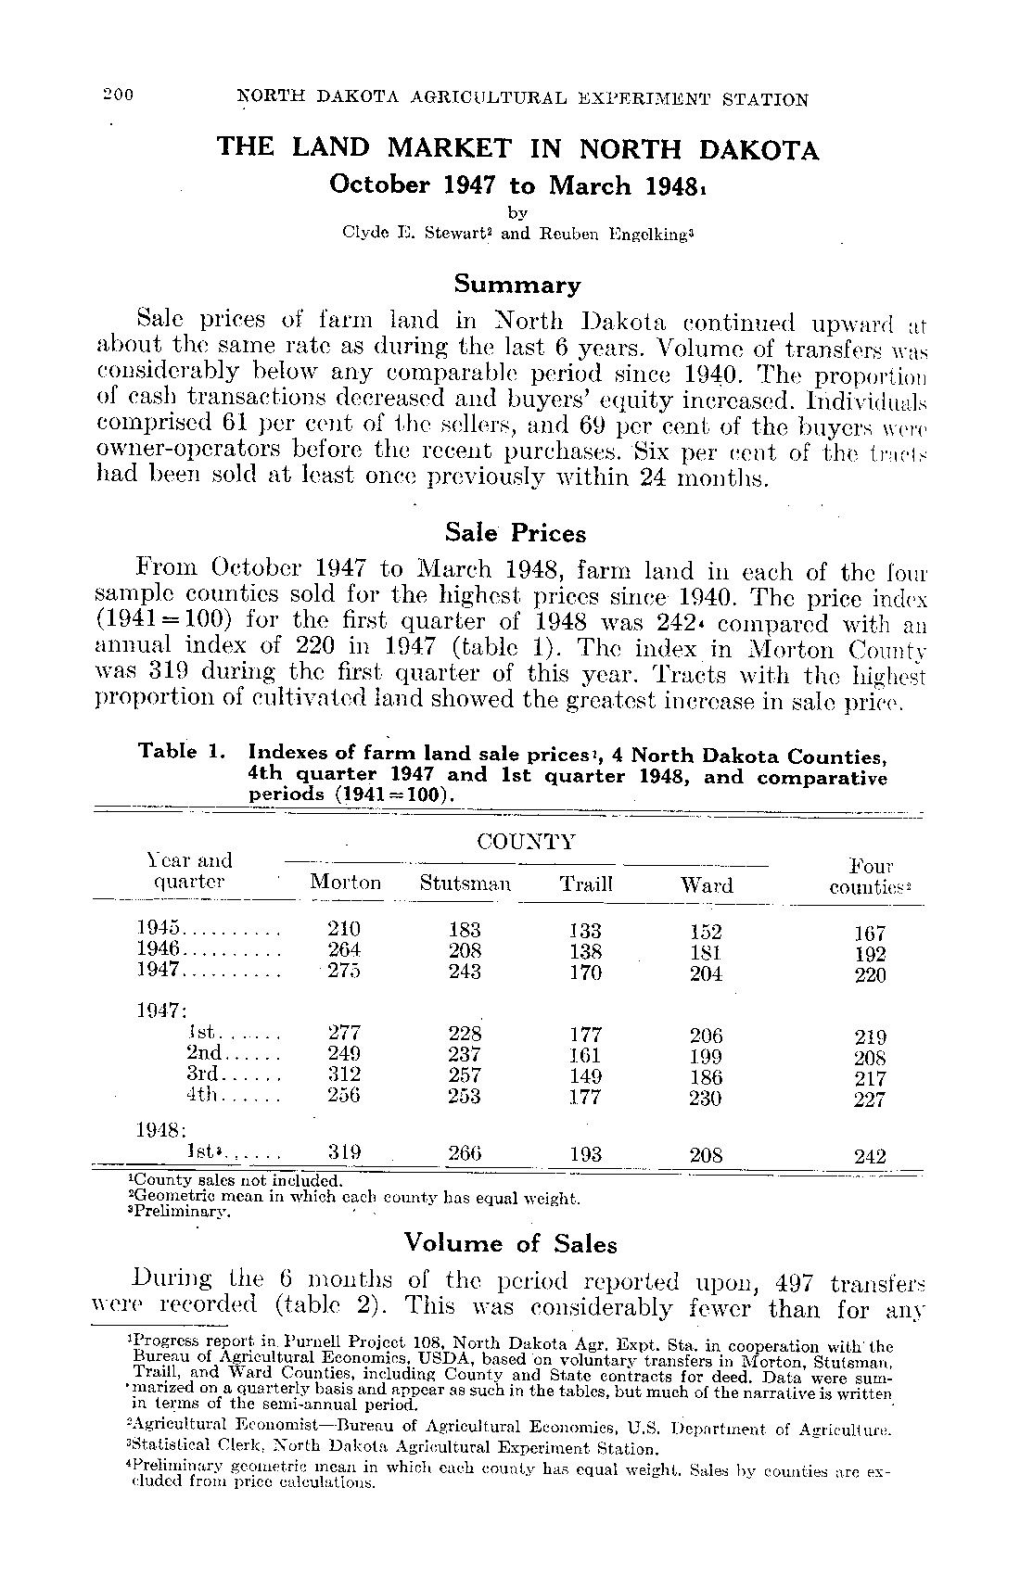 THE LAND MARKET in NORTH DAKOTA October 1947 to March 1948« Summary Sale Prices of Farm Land in North Dakota Continued Upward ;